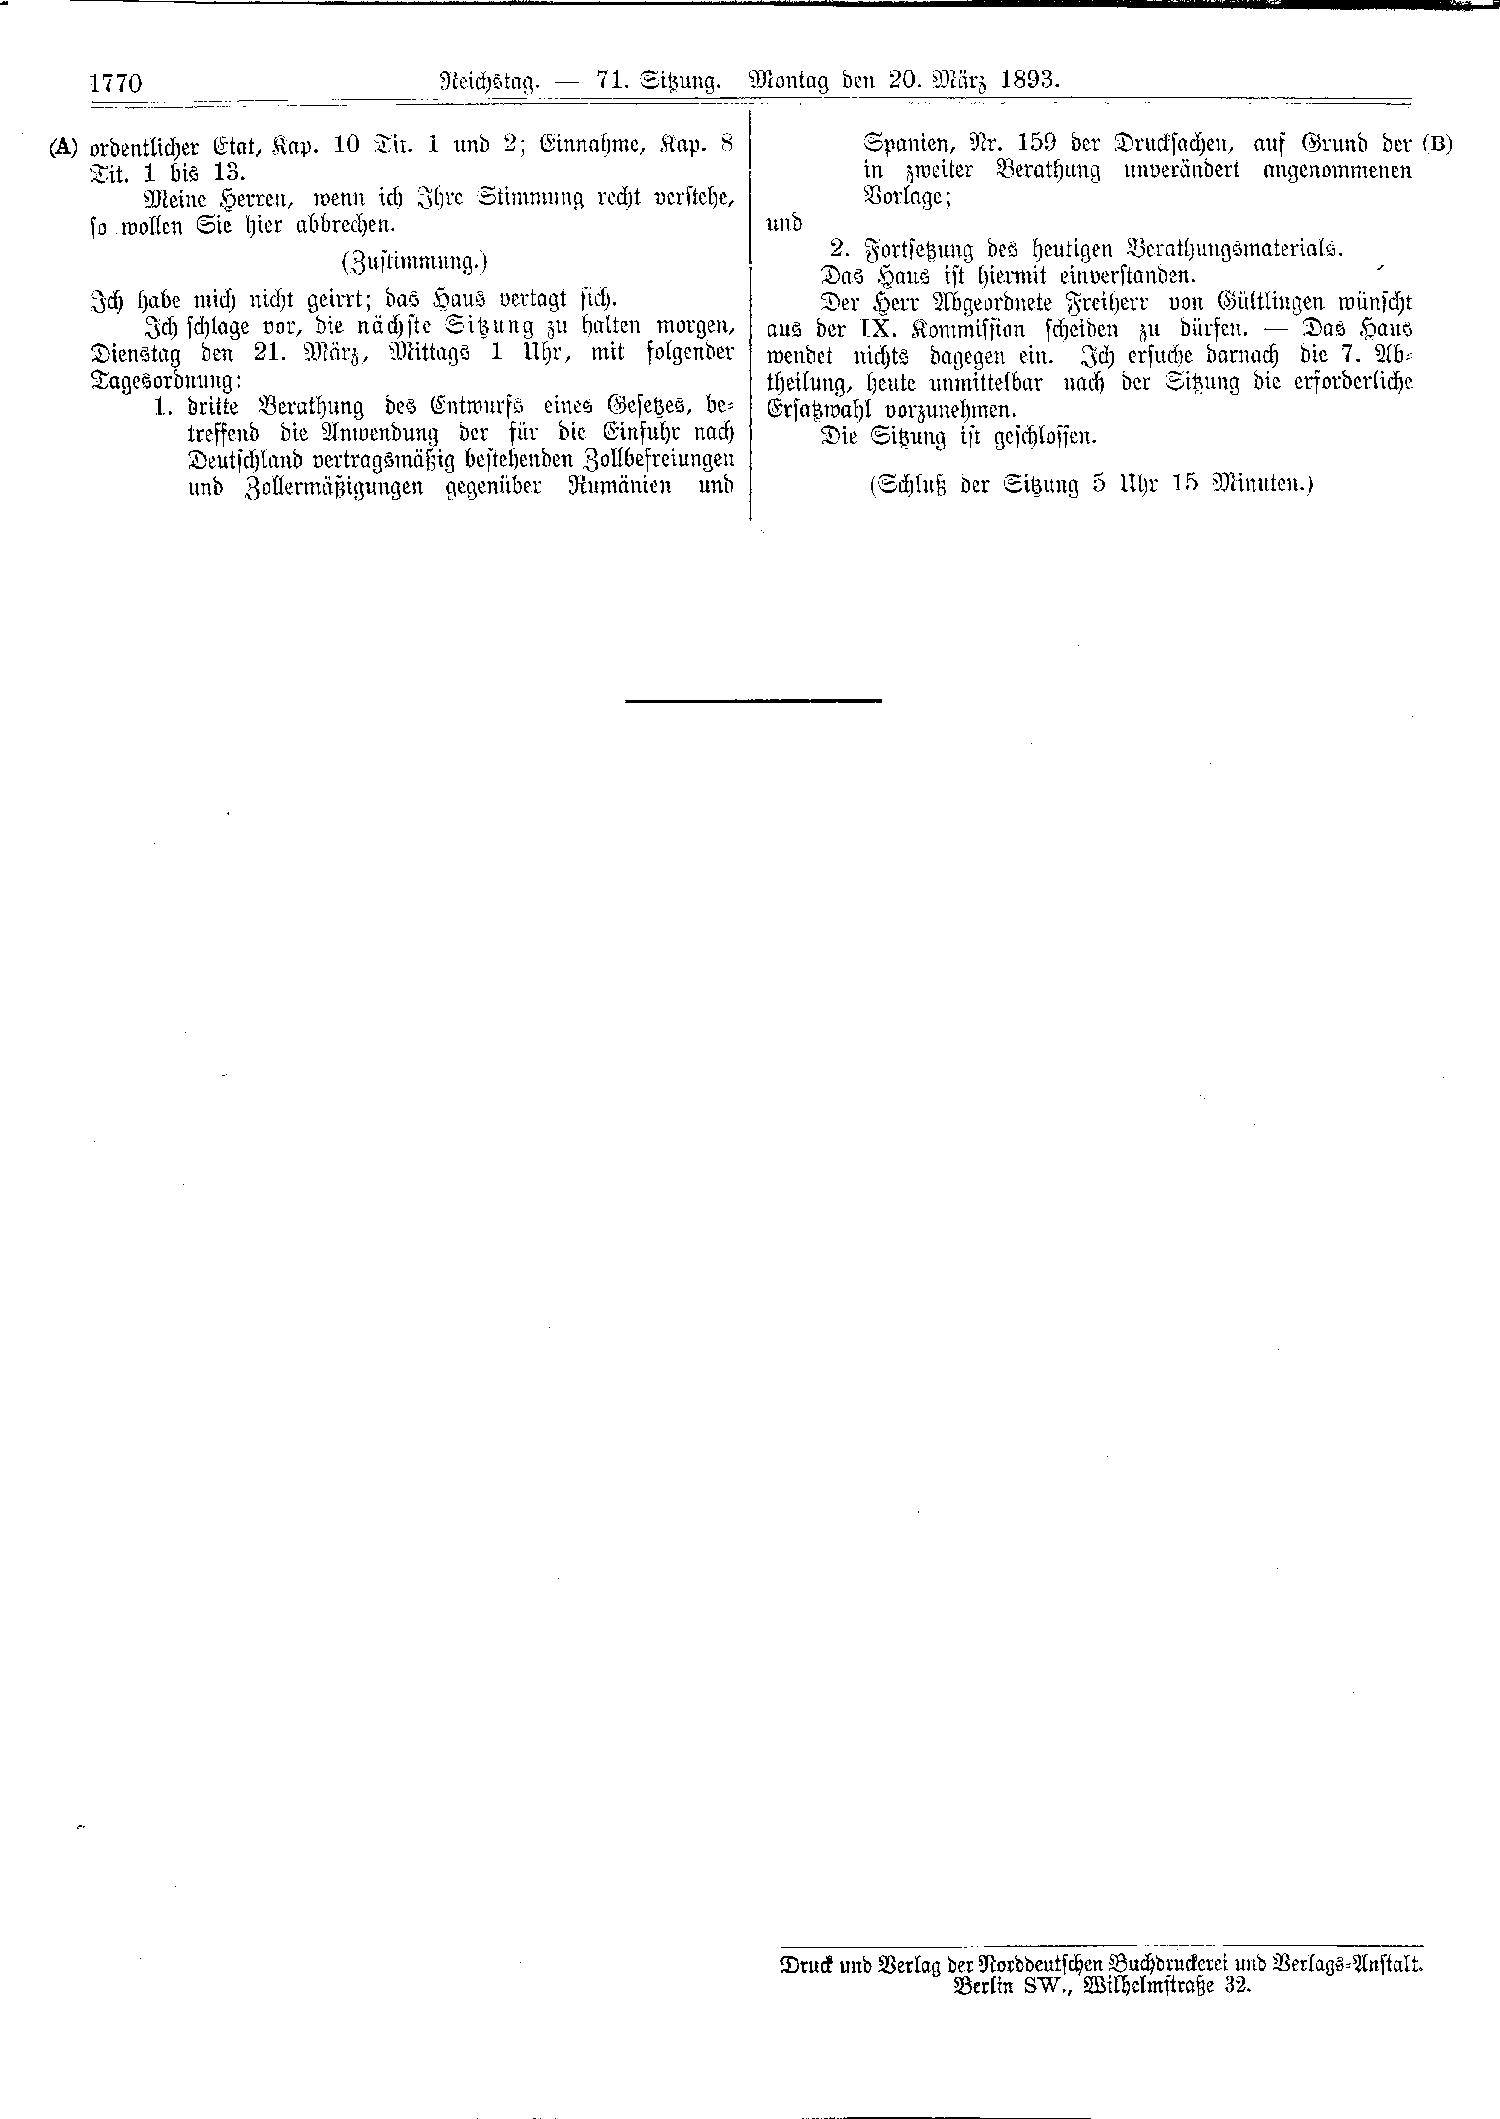 Scan of page 1770